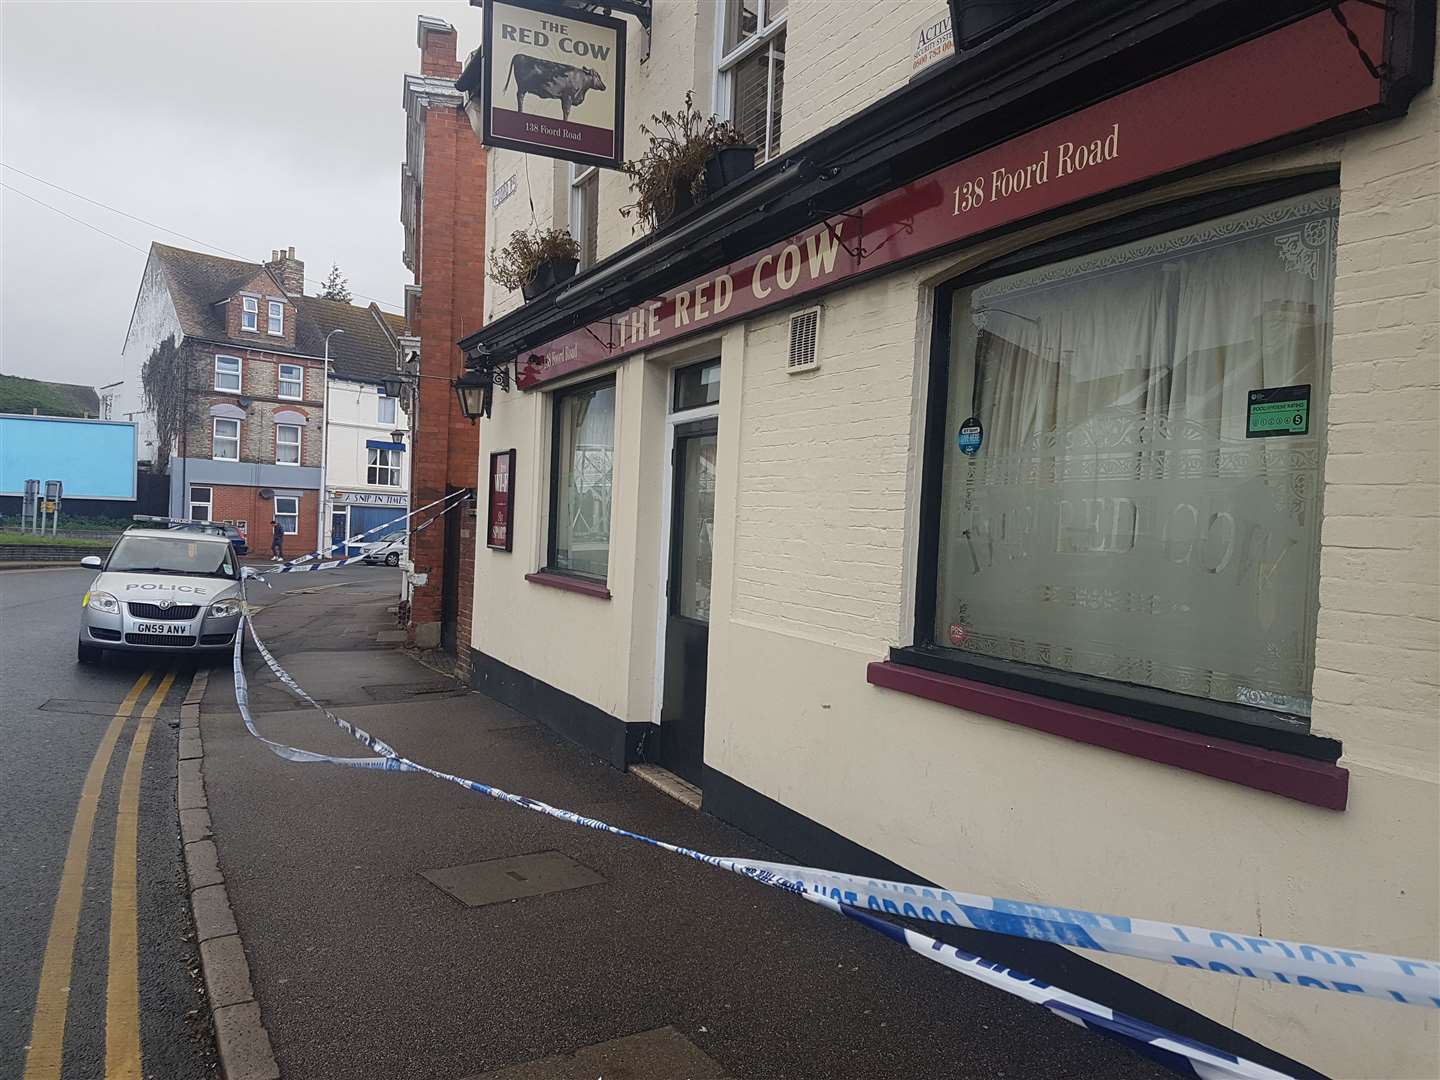 The pub was taped off after the shooting